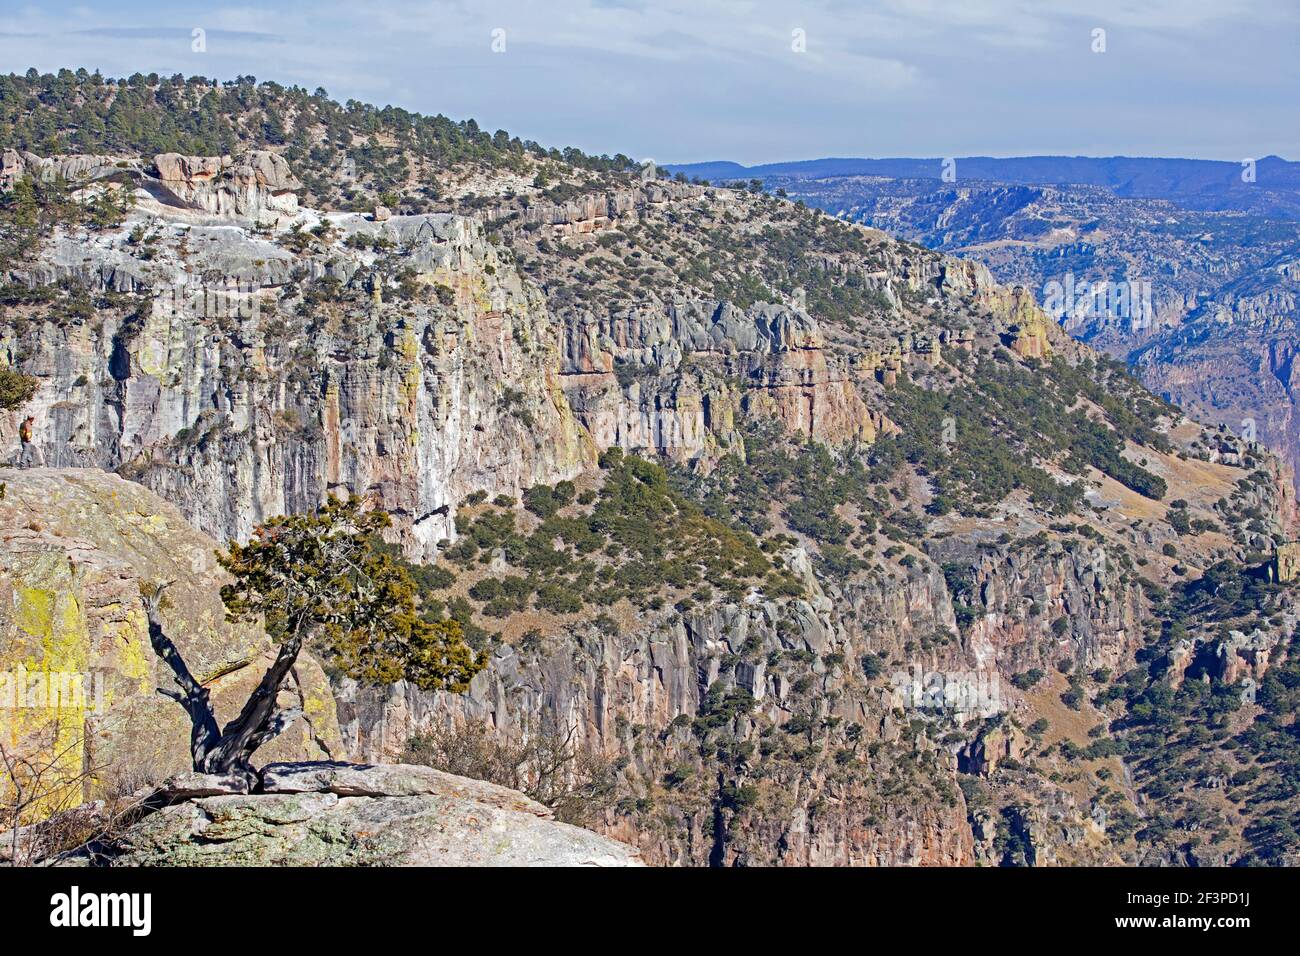 View over the Copper Canyon / Barrancas del Cobre near El Divisadero in the Sierra Madre Occidental in Chihuahua in northwestern Mexico Stock Photo